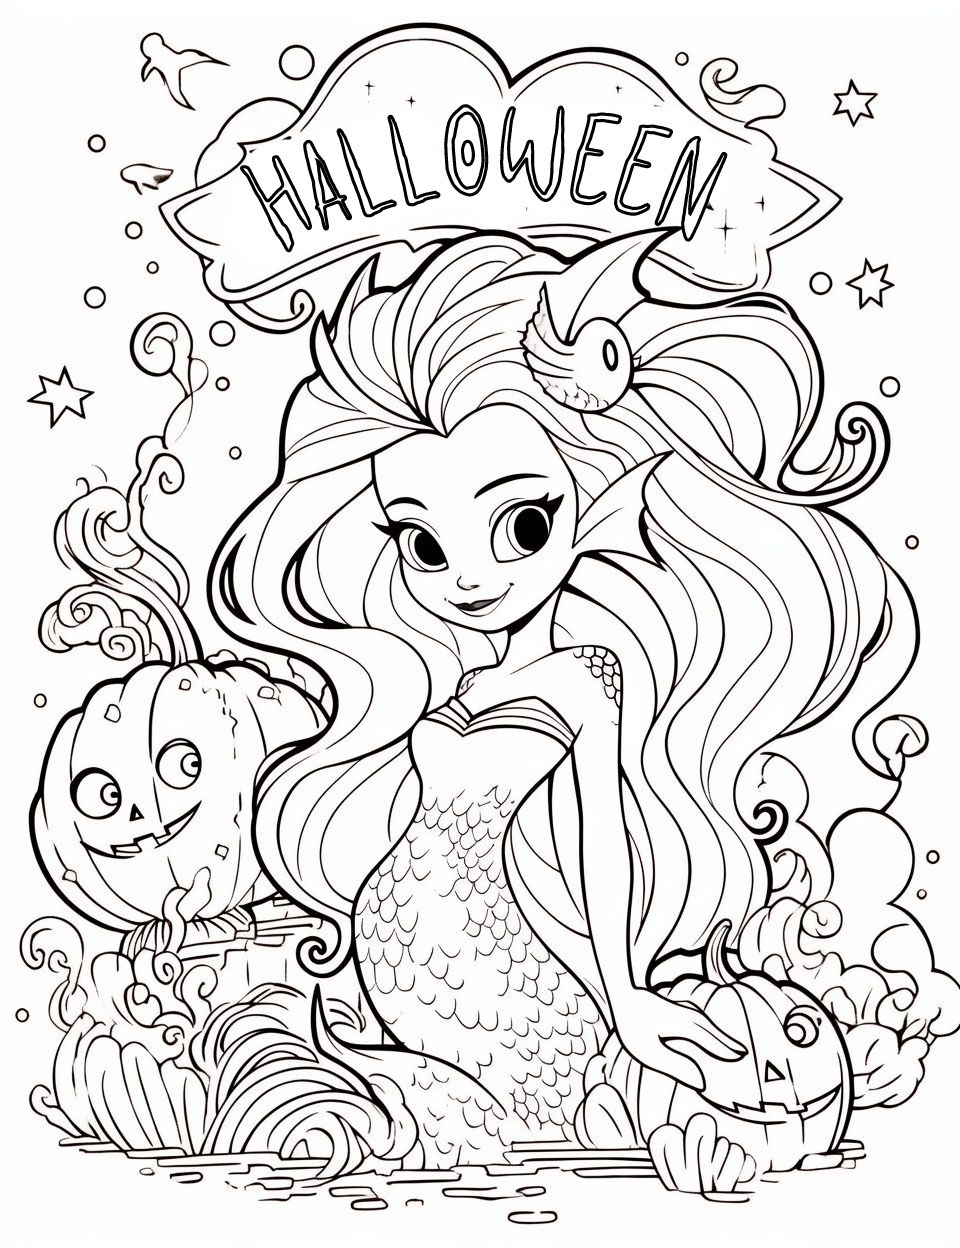 Spooky halloween coloring pages for kids and adults